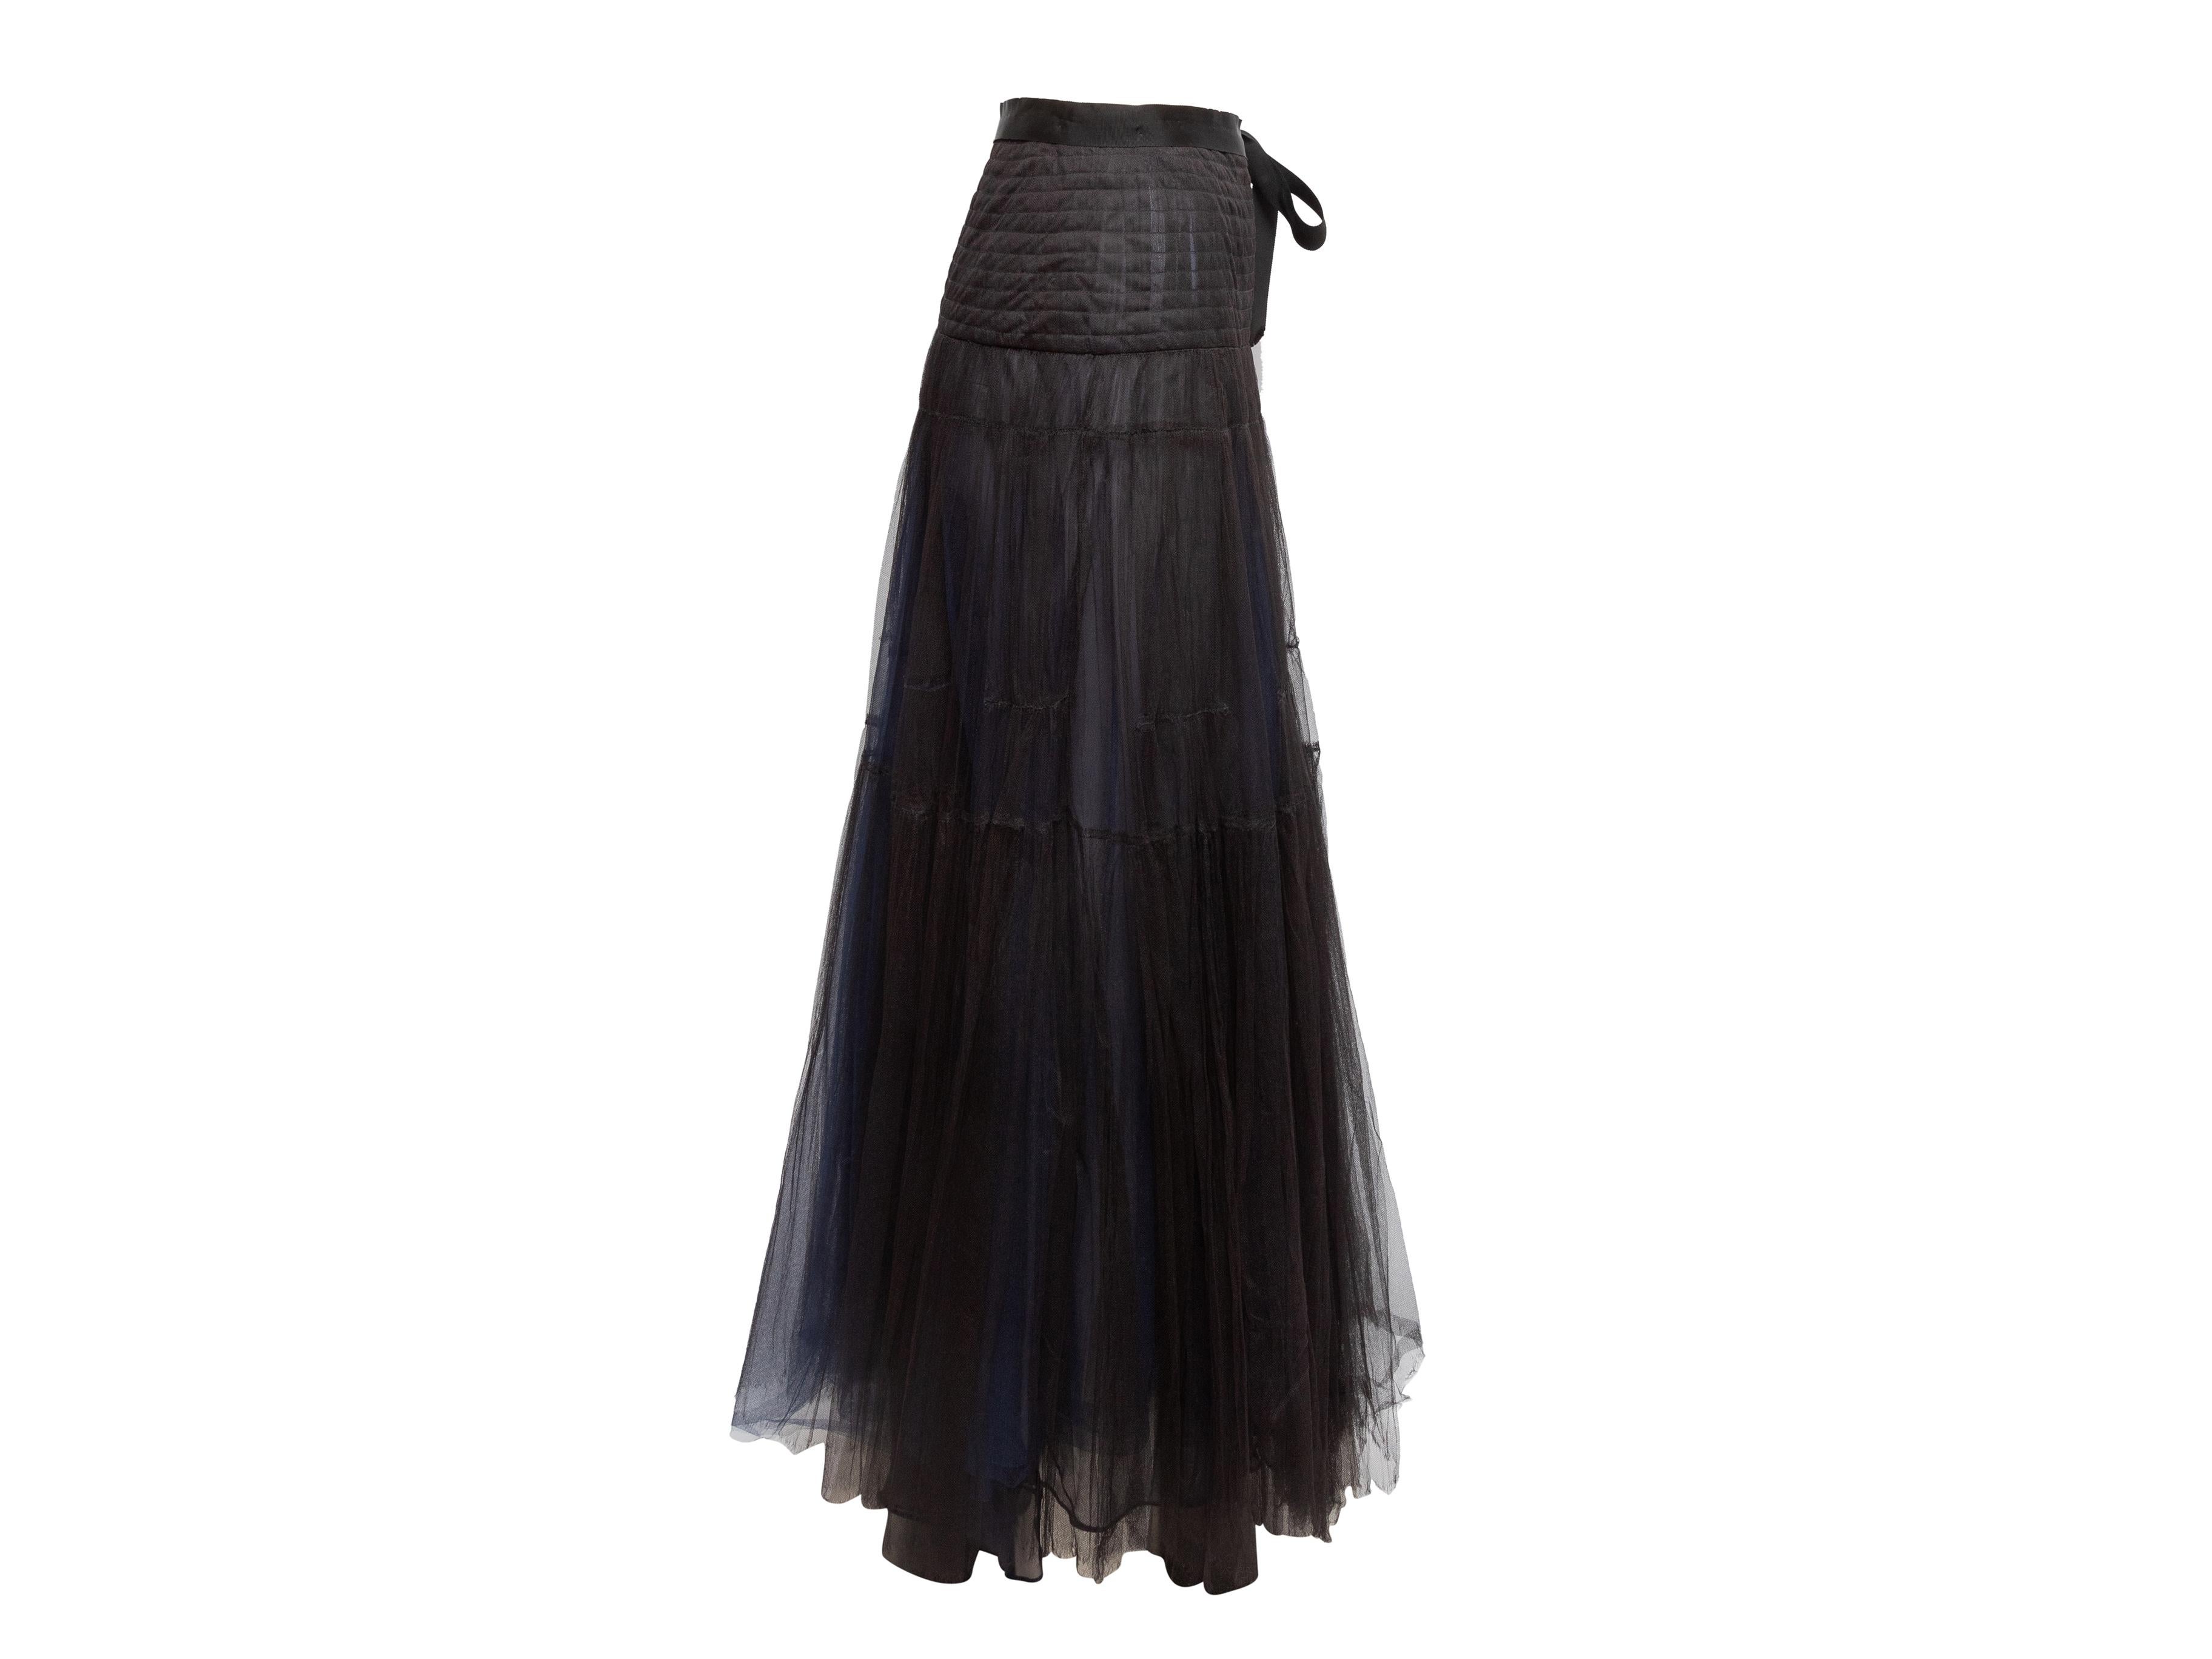 Product Details: Vintage black and navy tulle maxi skirt by Oscar de la Renta. Bow at side waist. 27